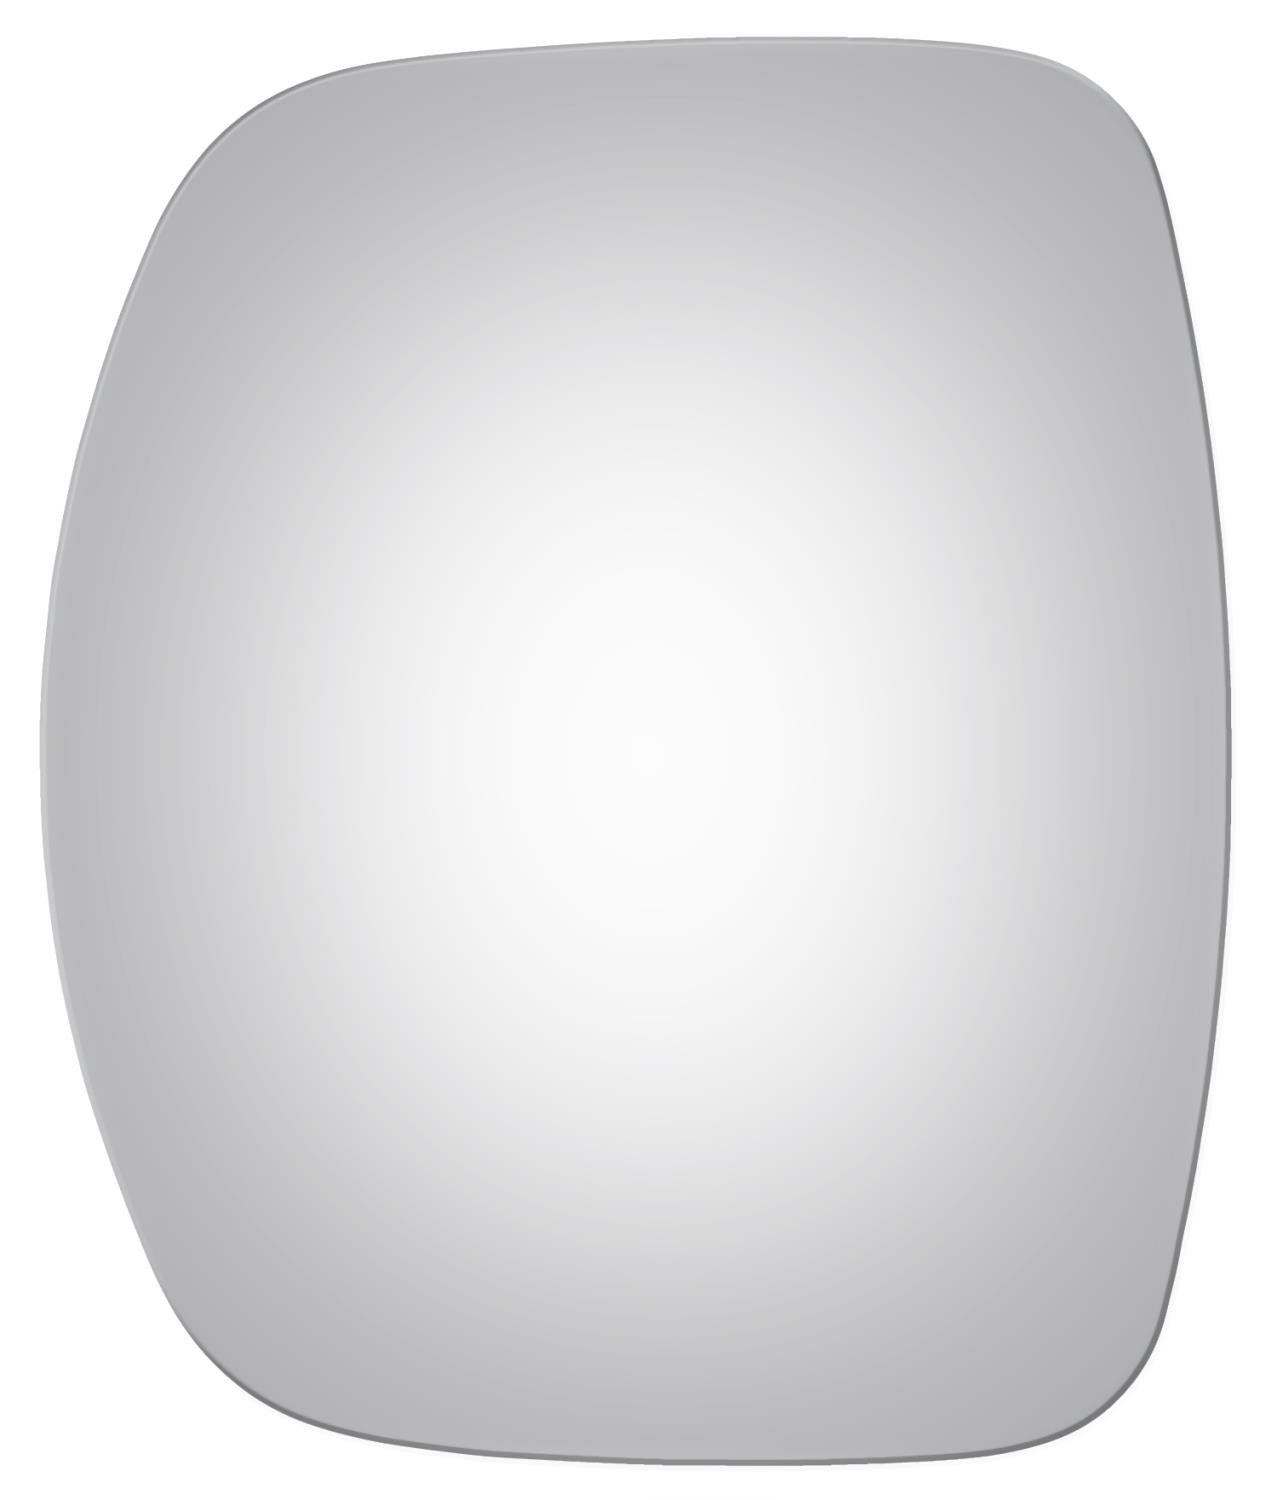 2750 SIDE VIEW MIRROR